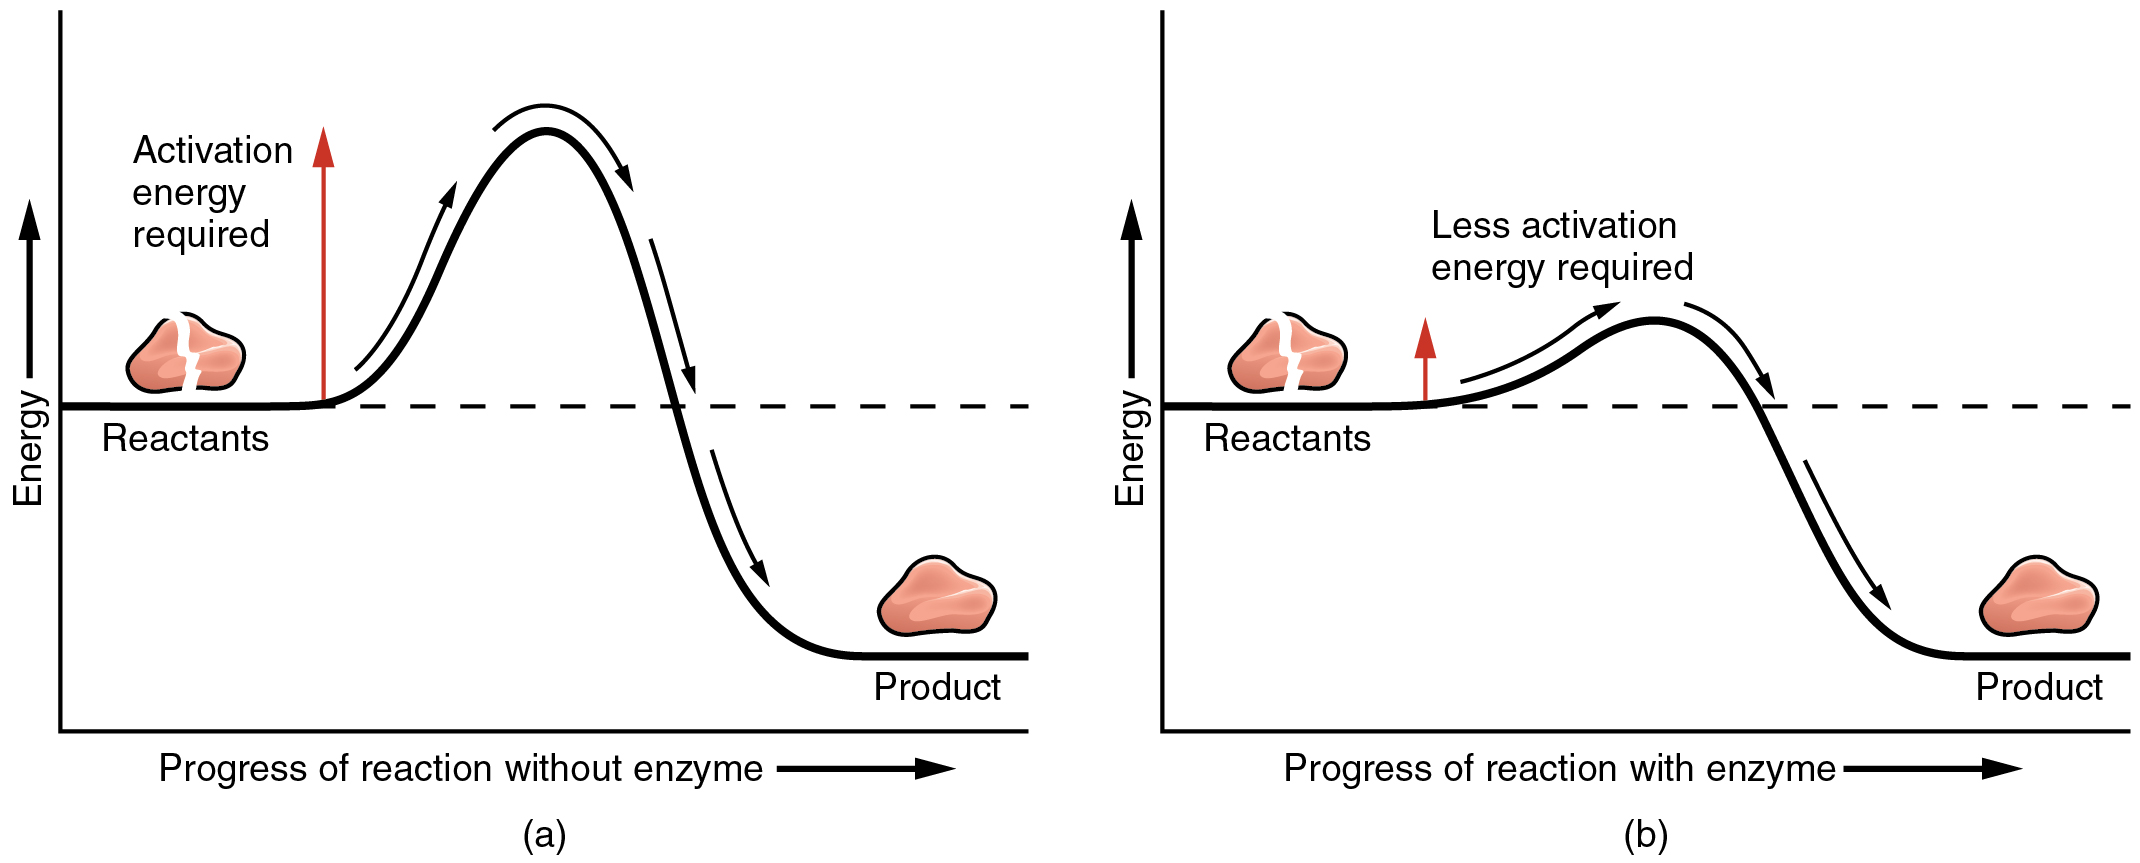 The left panel shows a graph of energy versus progress of reaction in the absence of enzymes. The right panel shows the graph in the presence of enzymes.